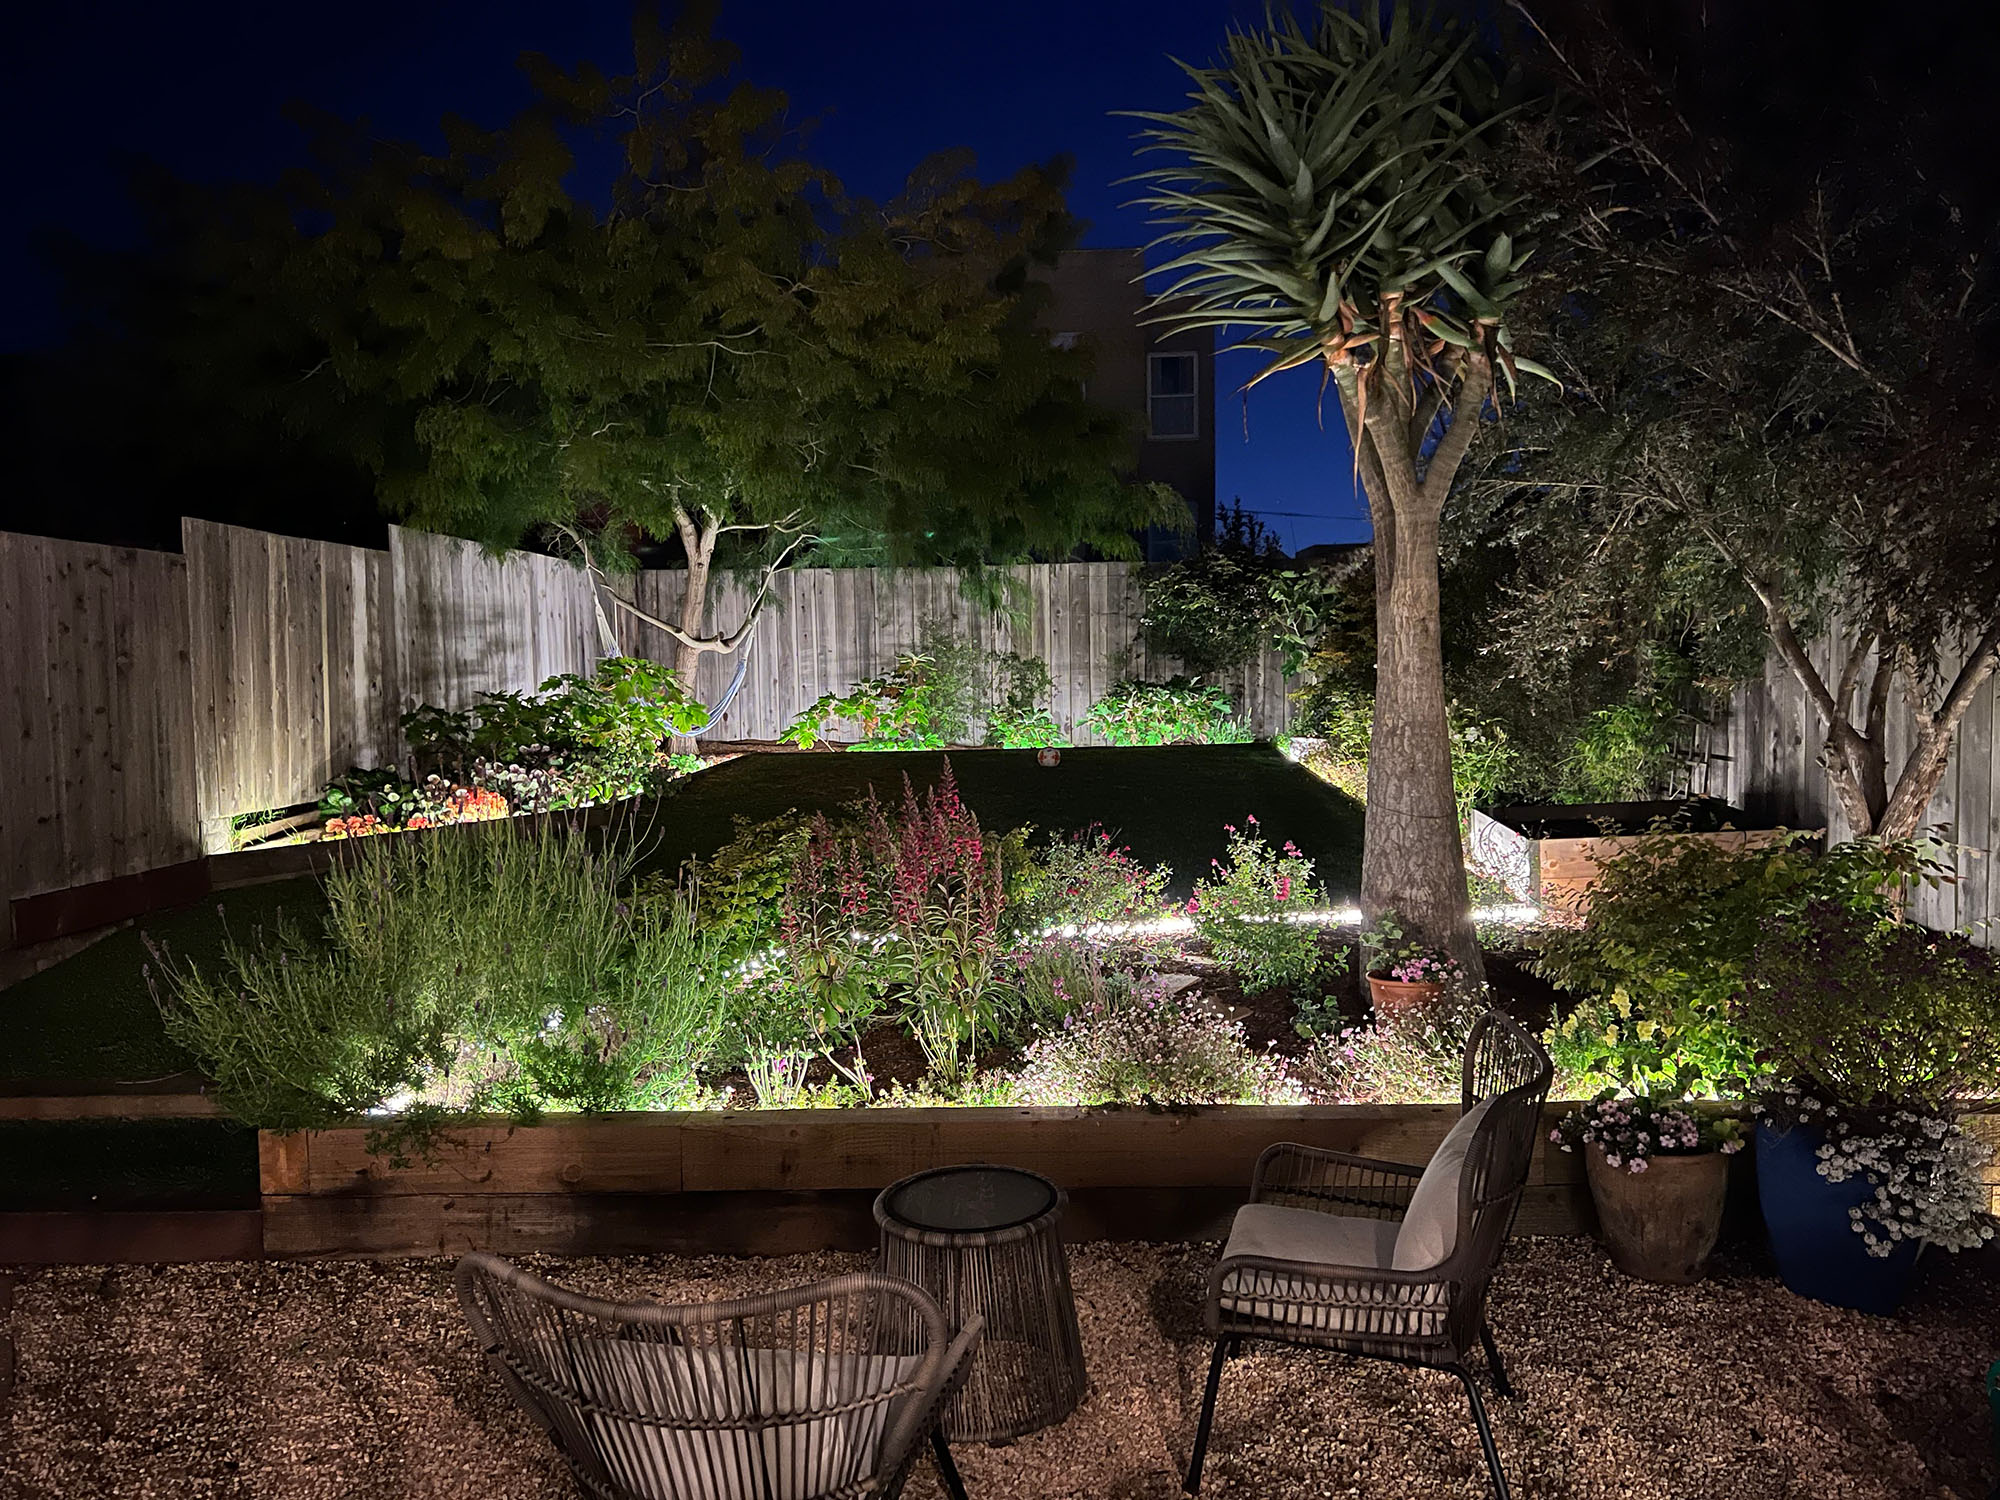 Property Photo: View of the rear yard at night, lit-up by landscape lights